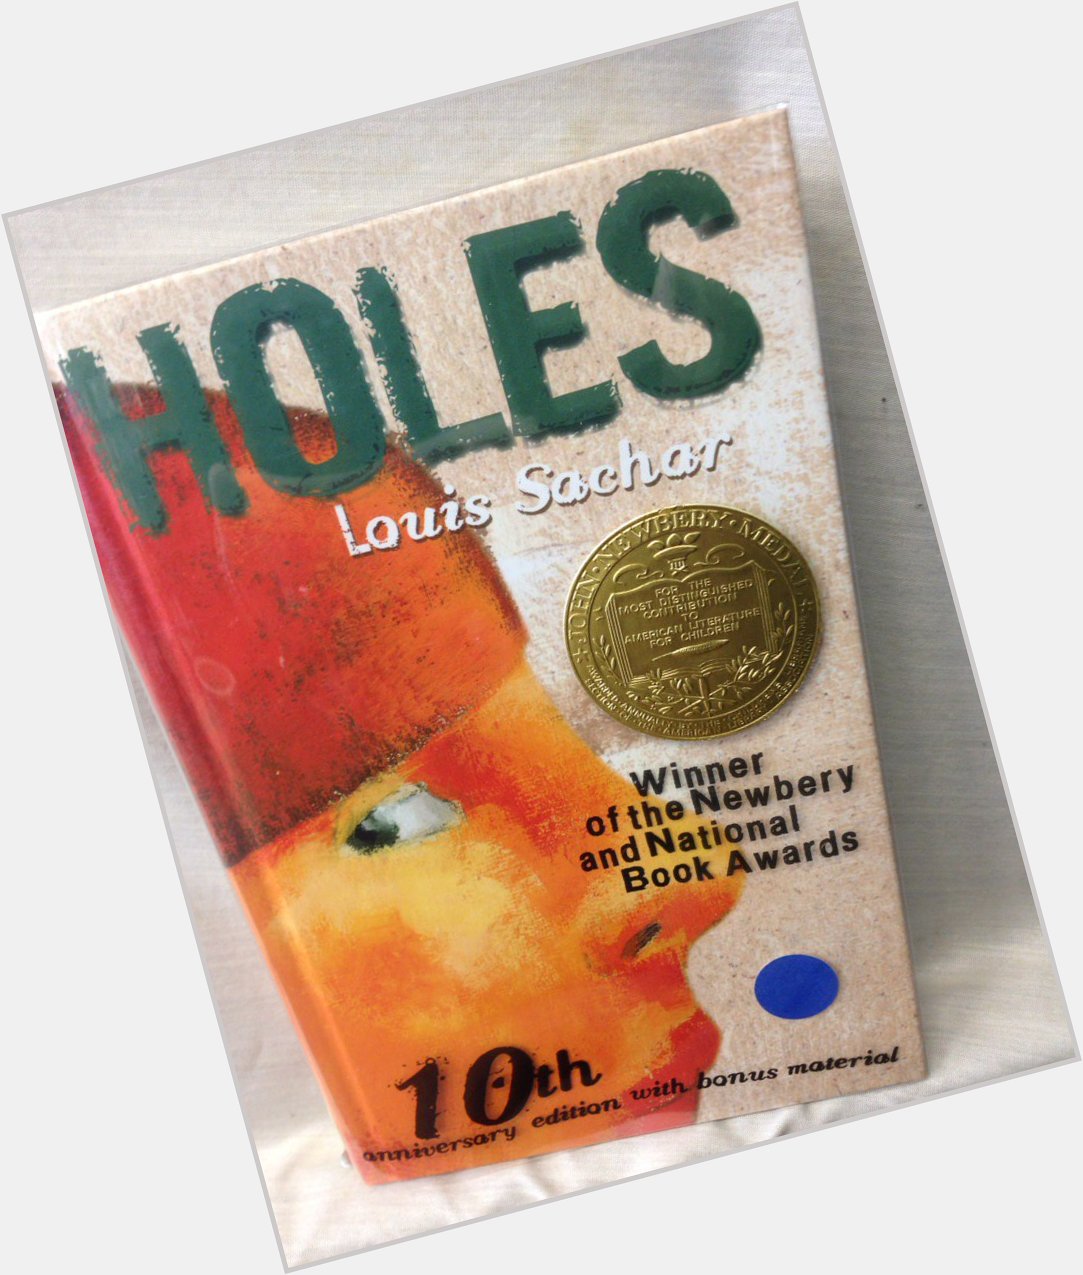 Happy Birthday Louis Sachar! Have you read his award winning novel Holes? You must read this book! You will be glad! 